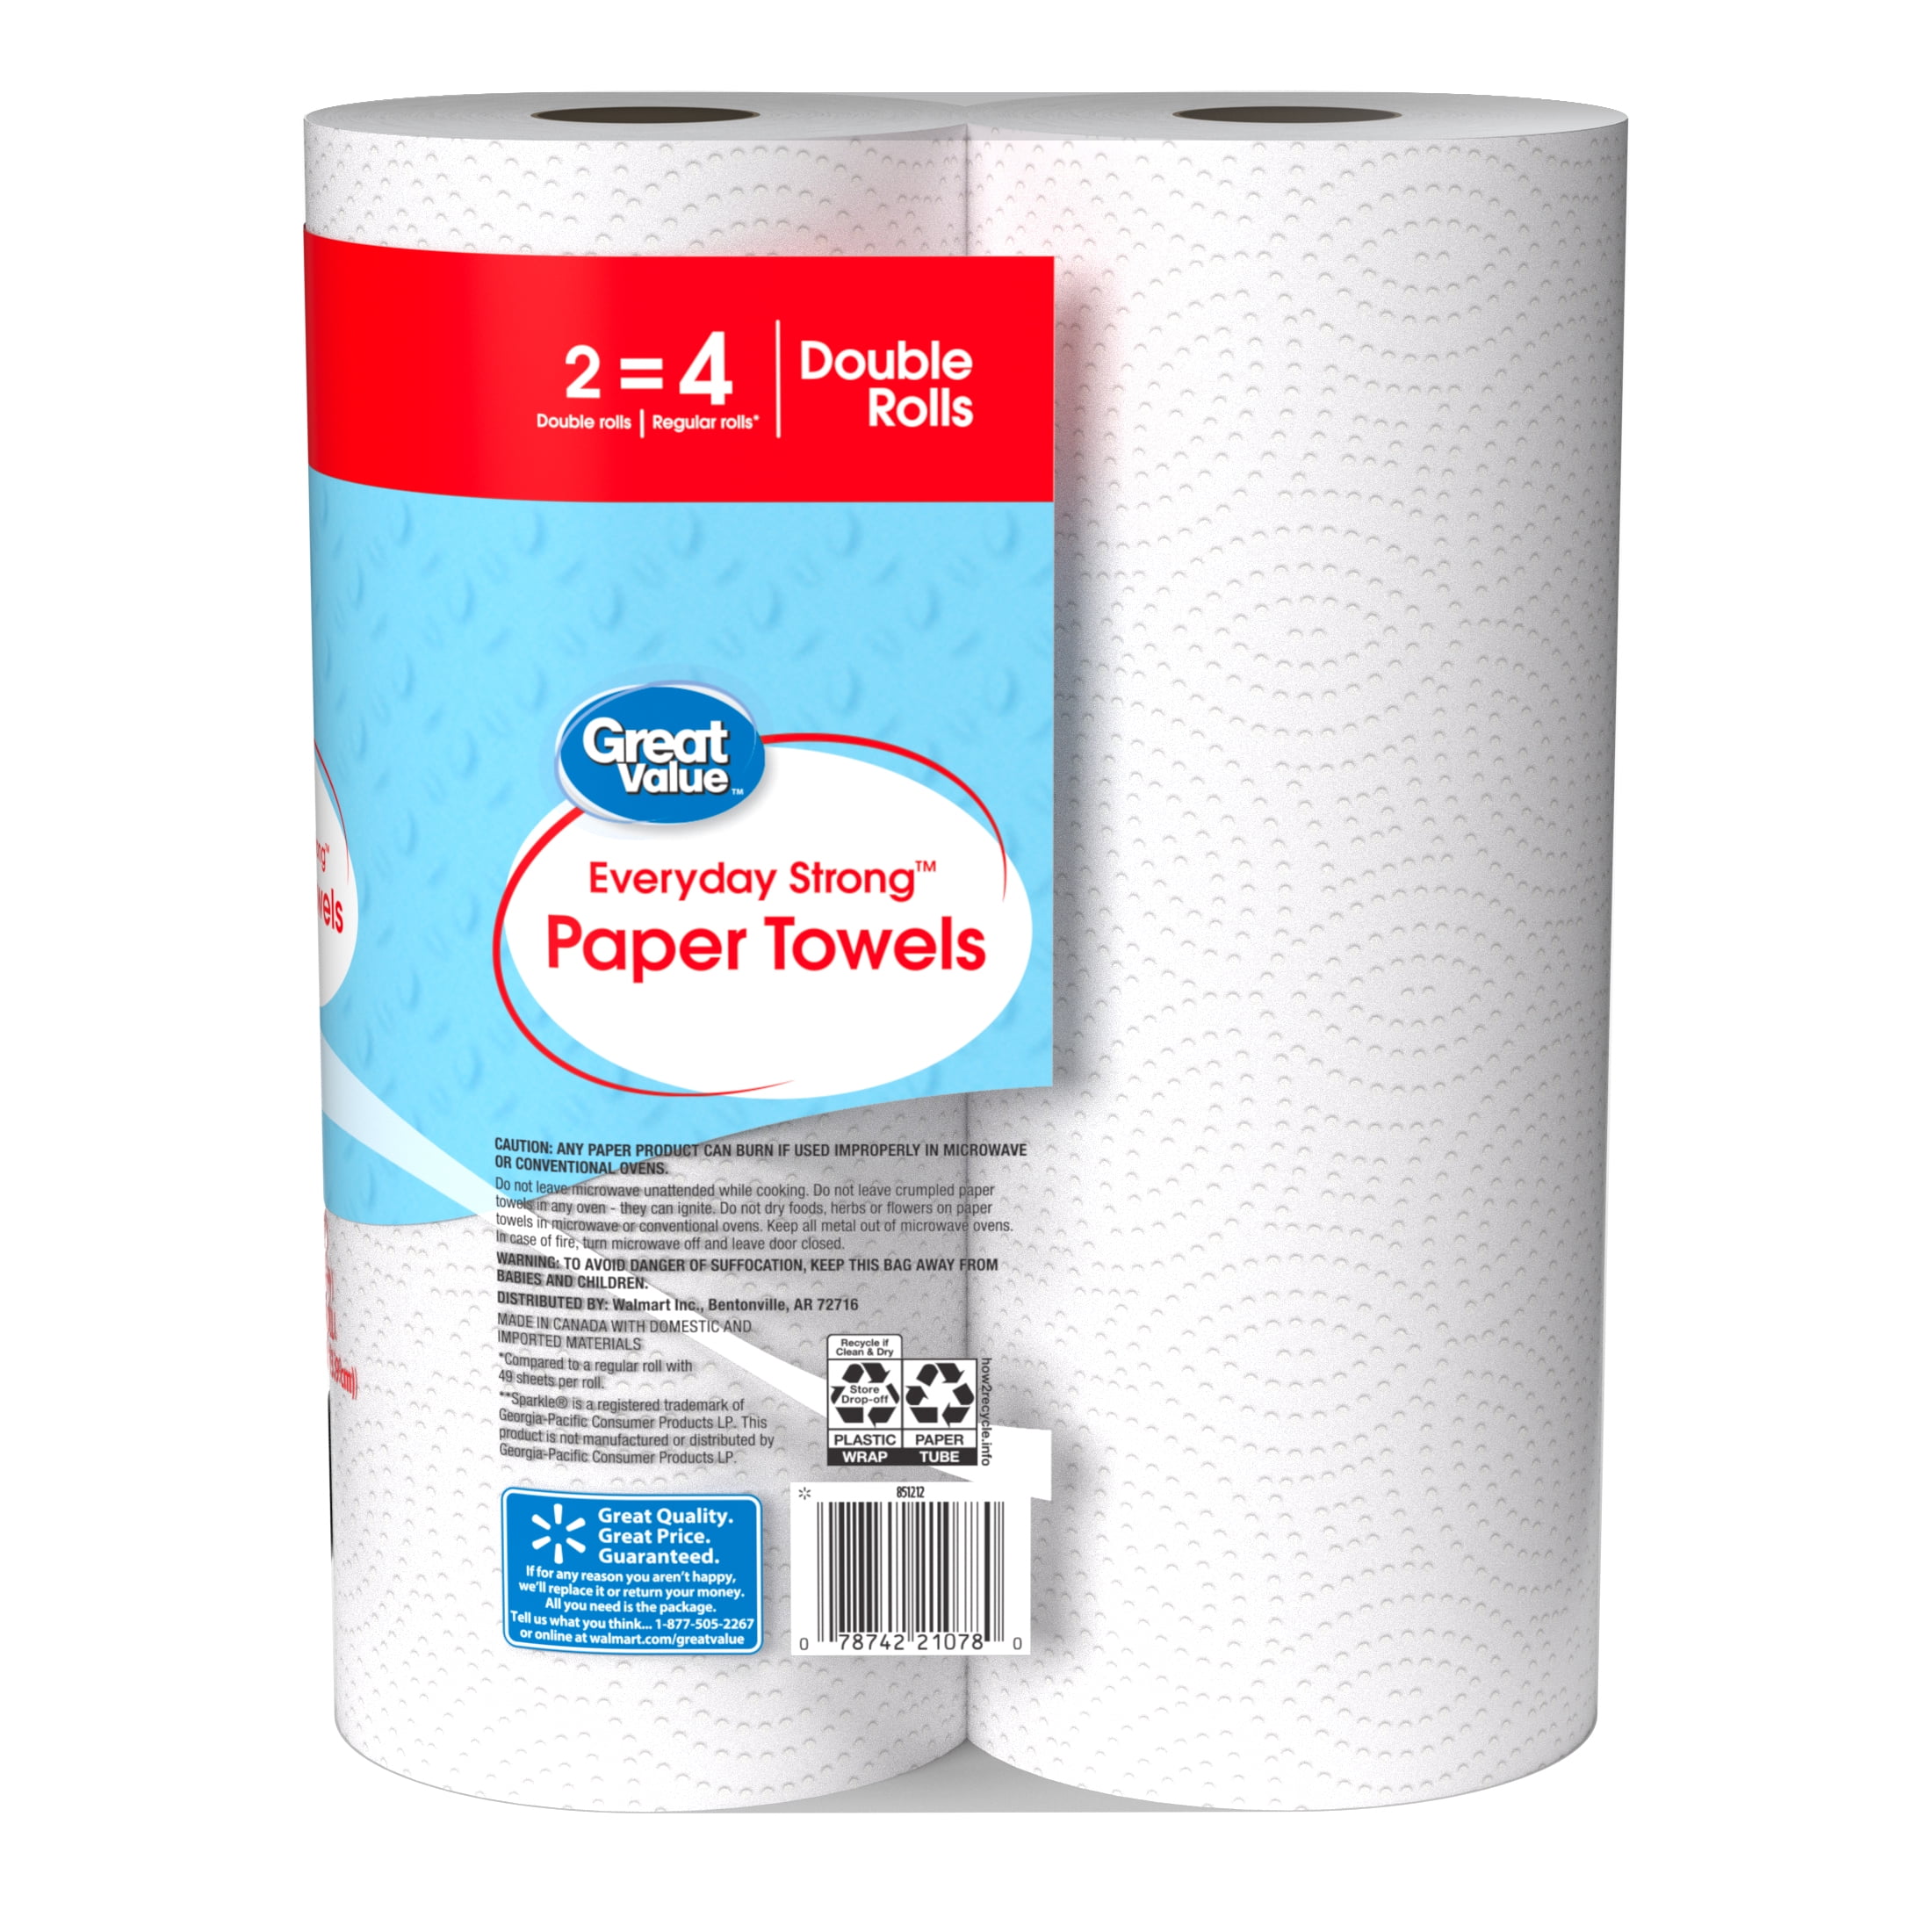 Great Value Everyday Strong Paper Towels, Split Sheets, 2 Double Rolls 